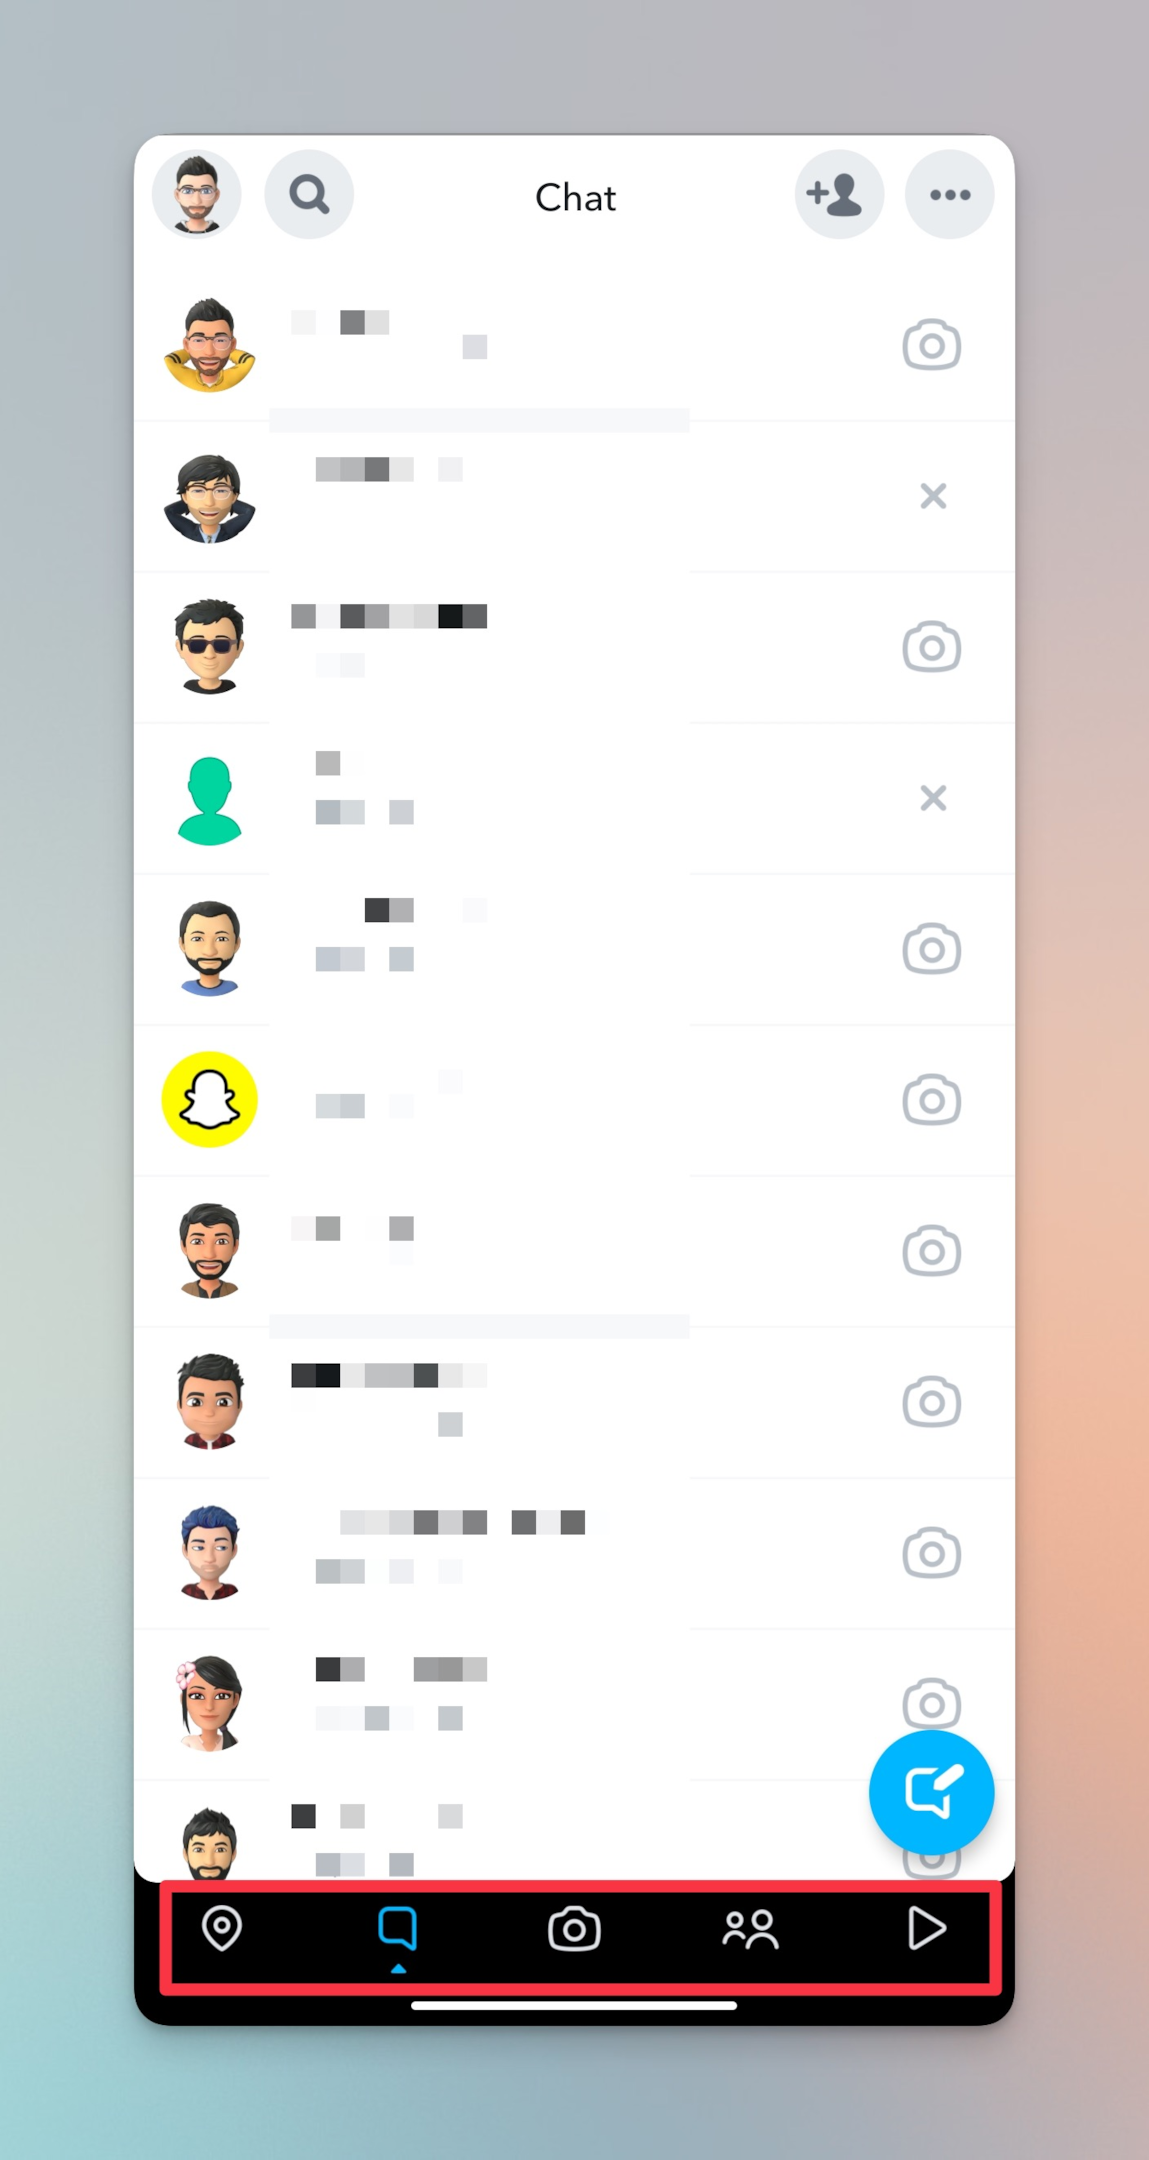 Remote.tools shows the chat list to open the chat of a snap user. You can share one location with a snapchat user or certain users one by one